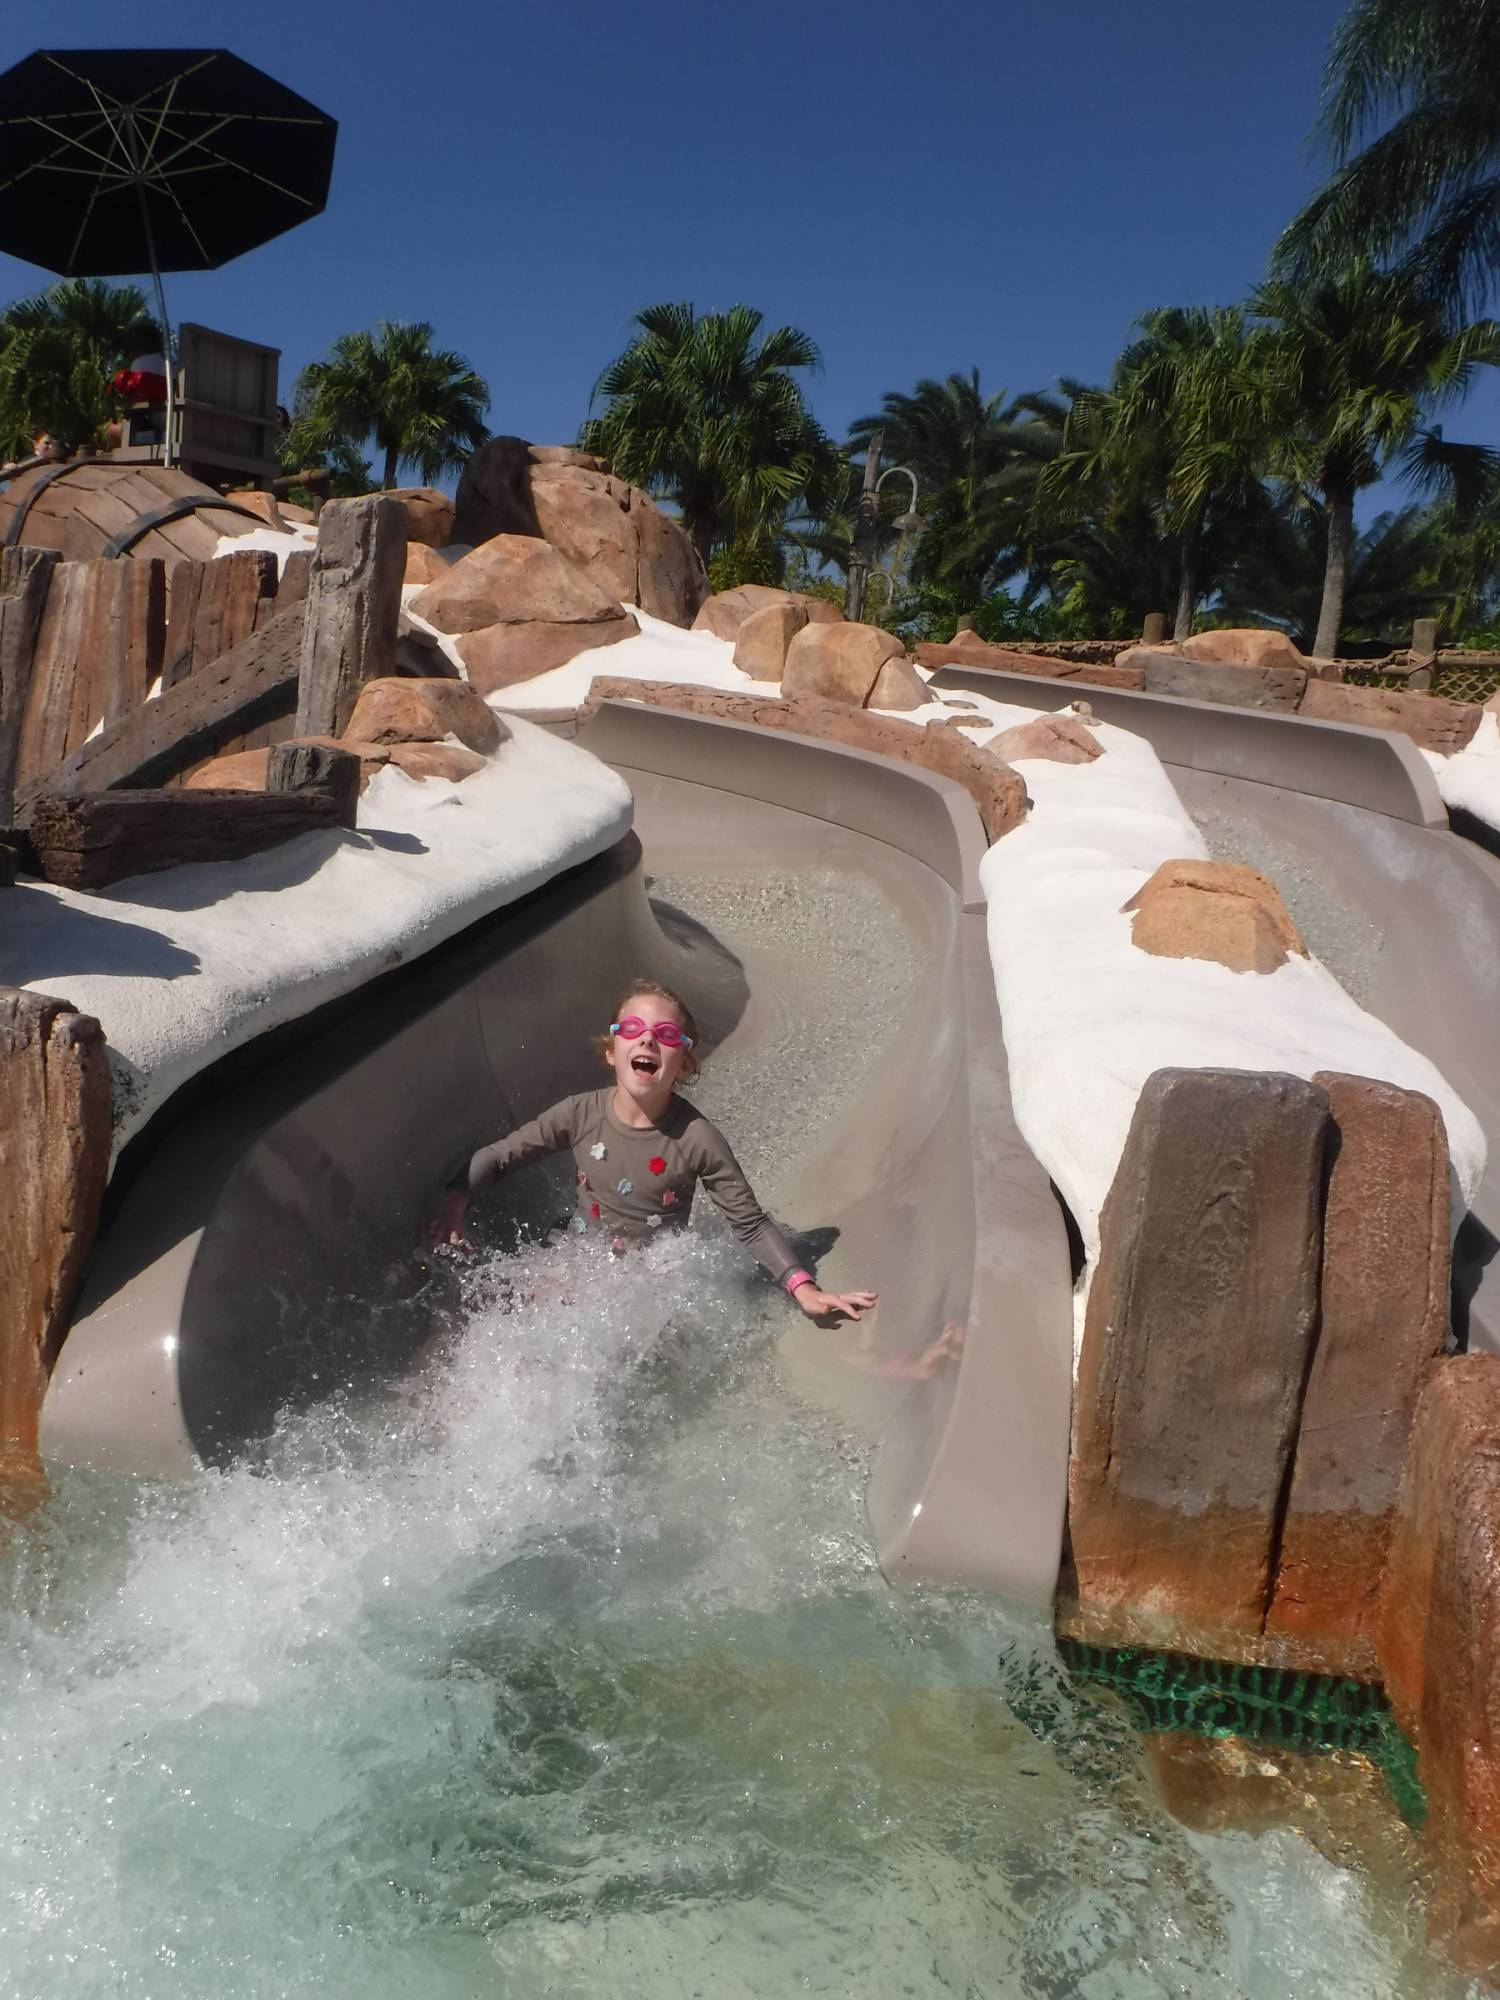 Which water park is right for your family - Typhoon Lagoon or Blizzard Beach? |PassPorter.com